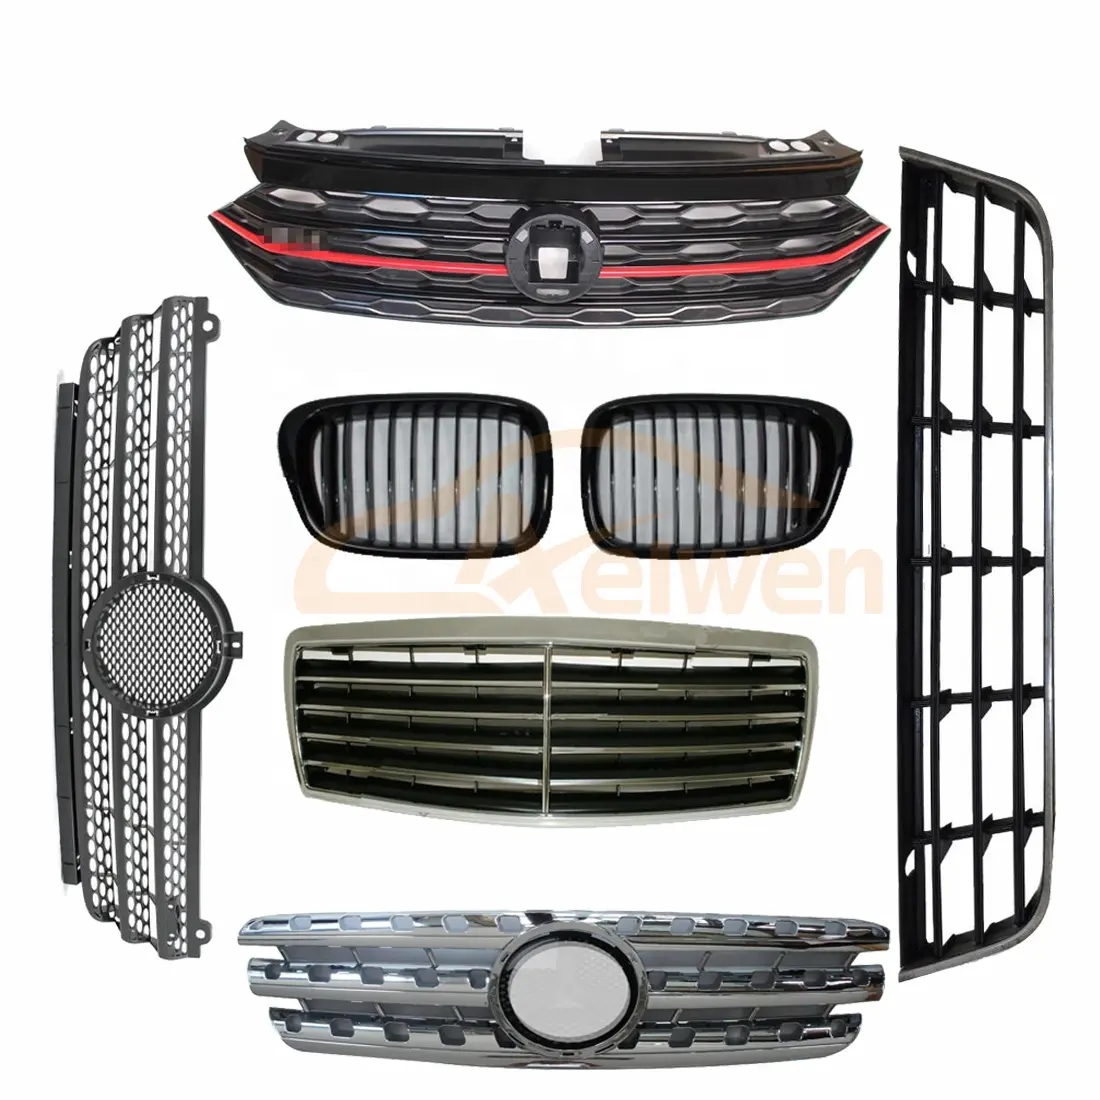 Auto Car Front Grille Used For BMW For Mercedes Benz For Audi For VW For Skoda For Seat For Ford For Renault